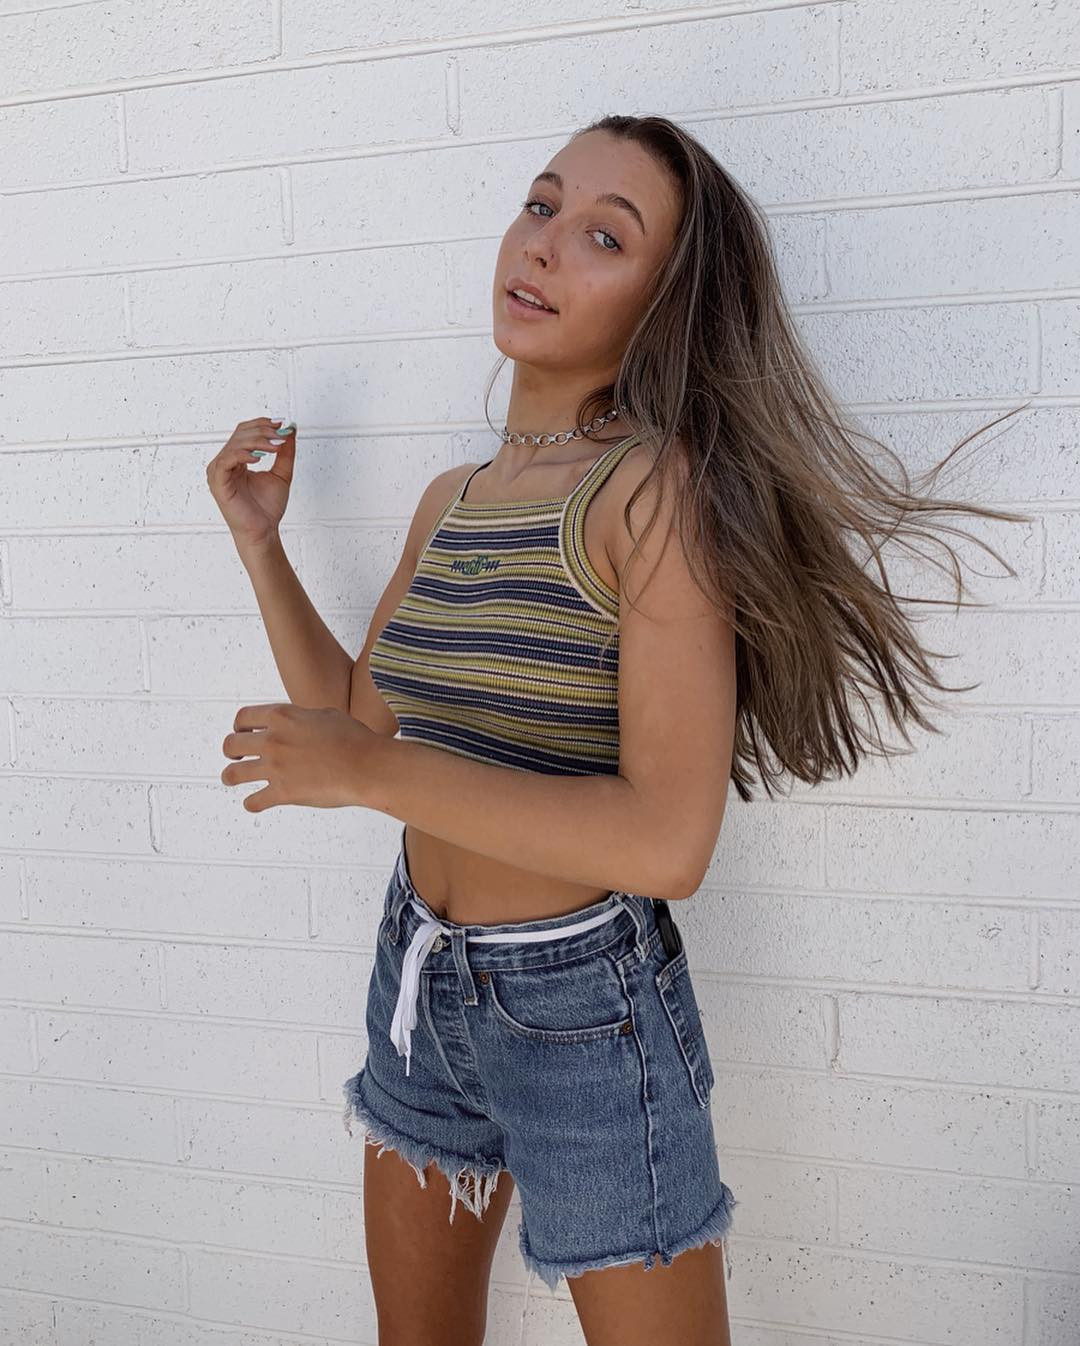 How Emma Chamberlain And More Creators Became Youtubes Biggest Stars